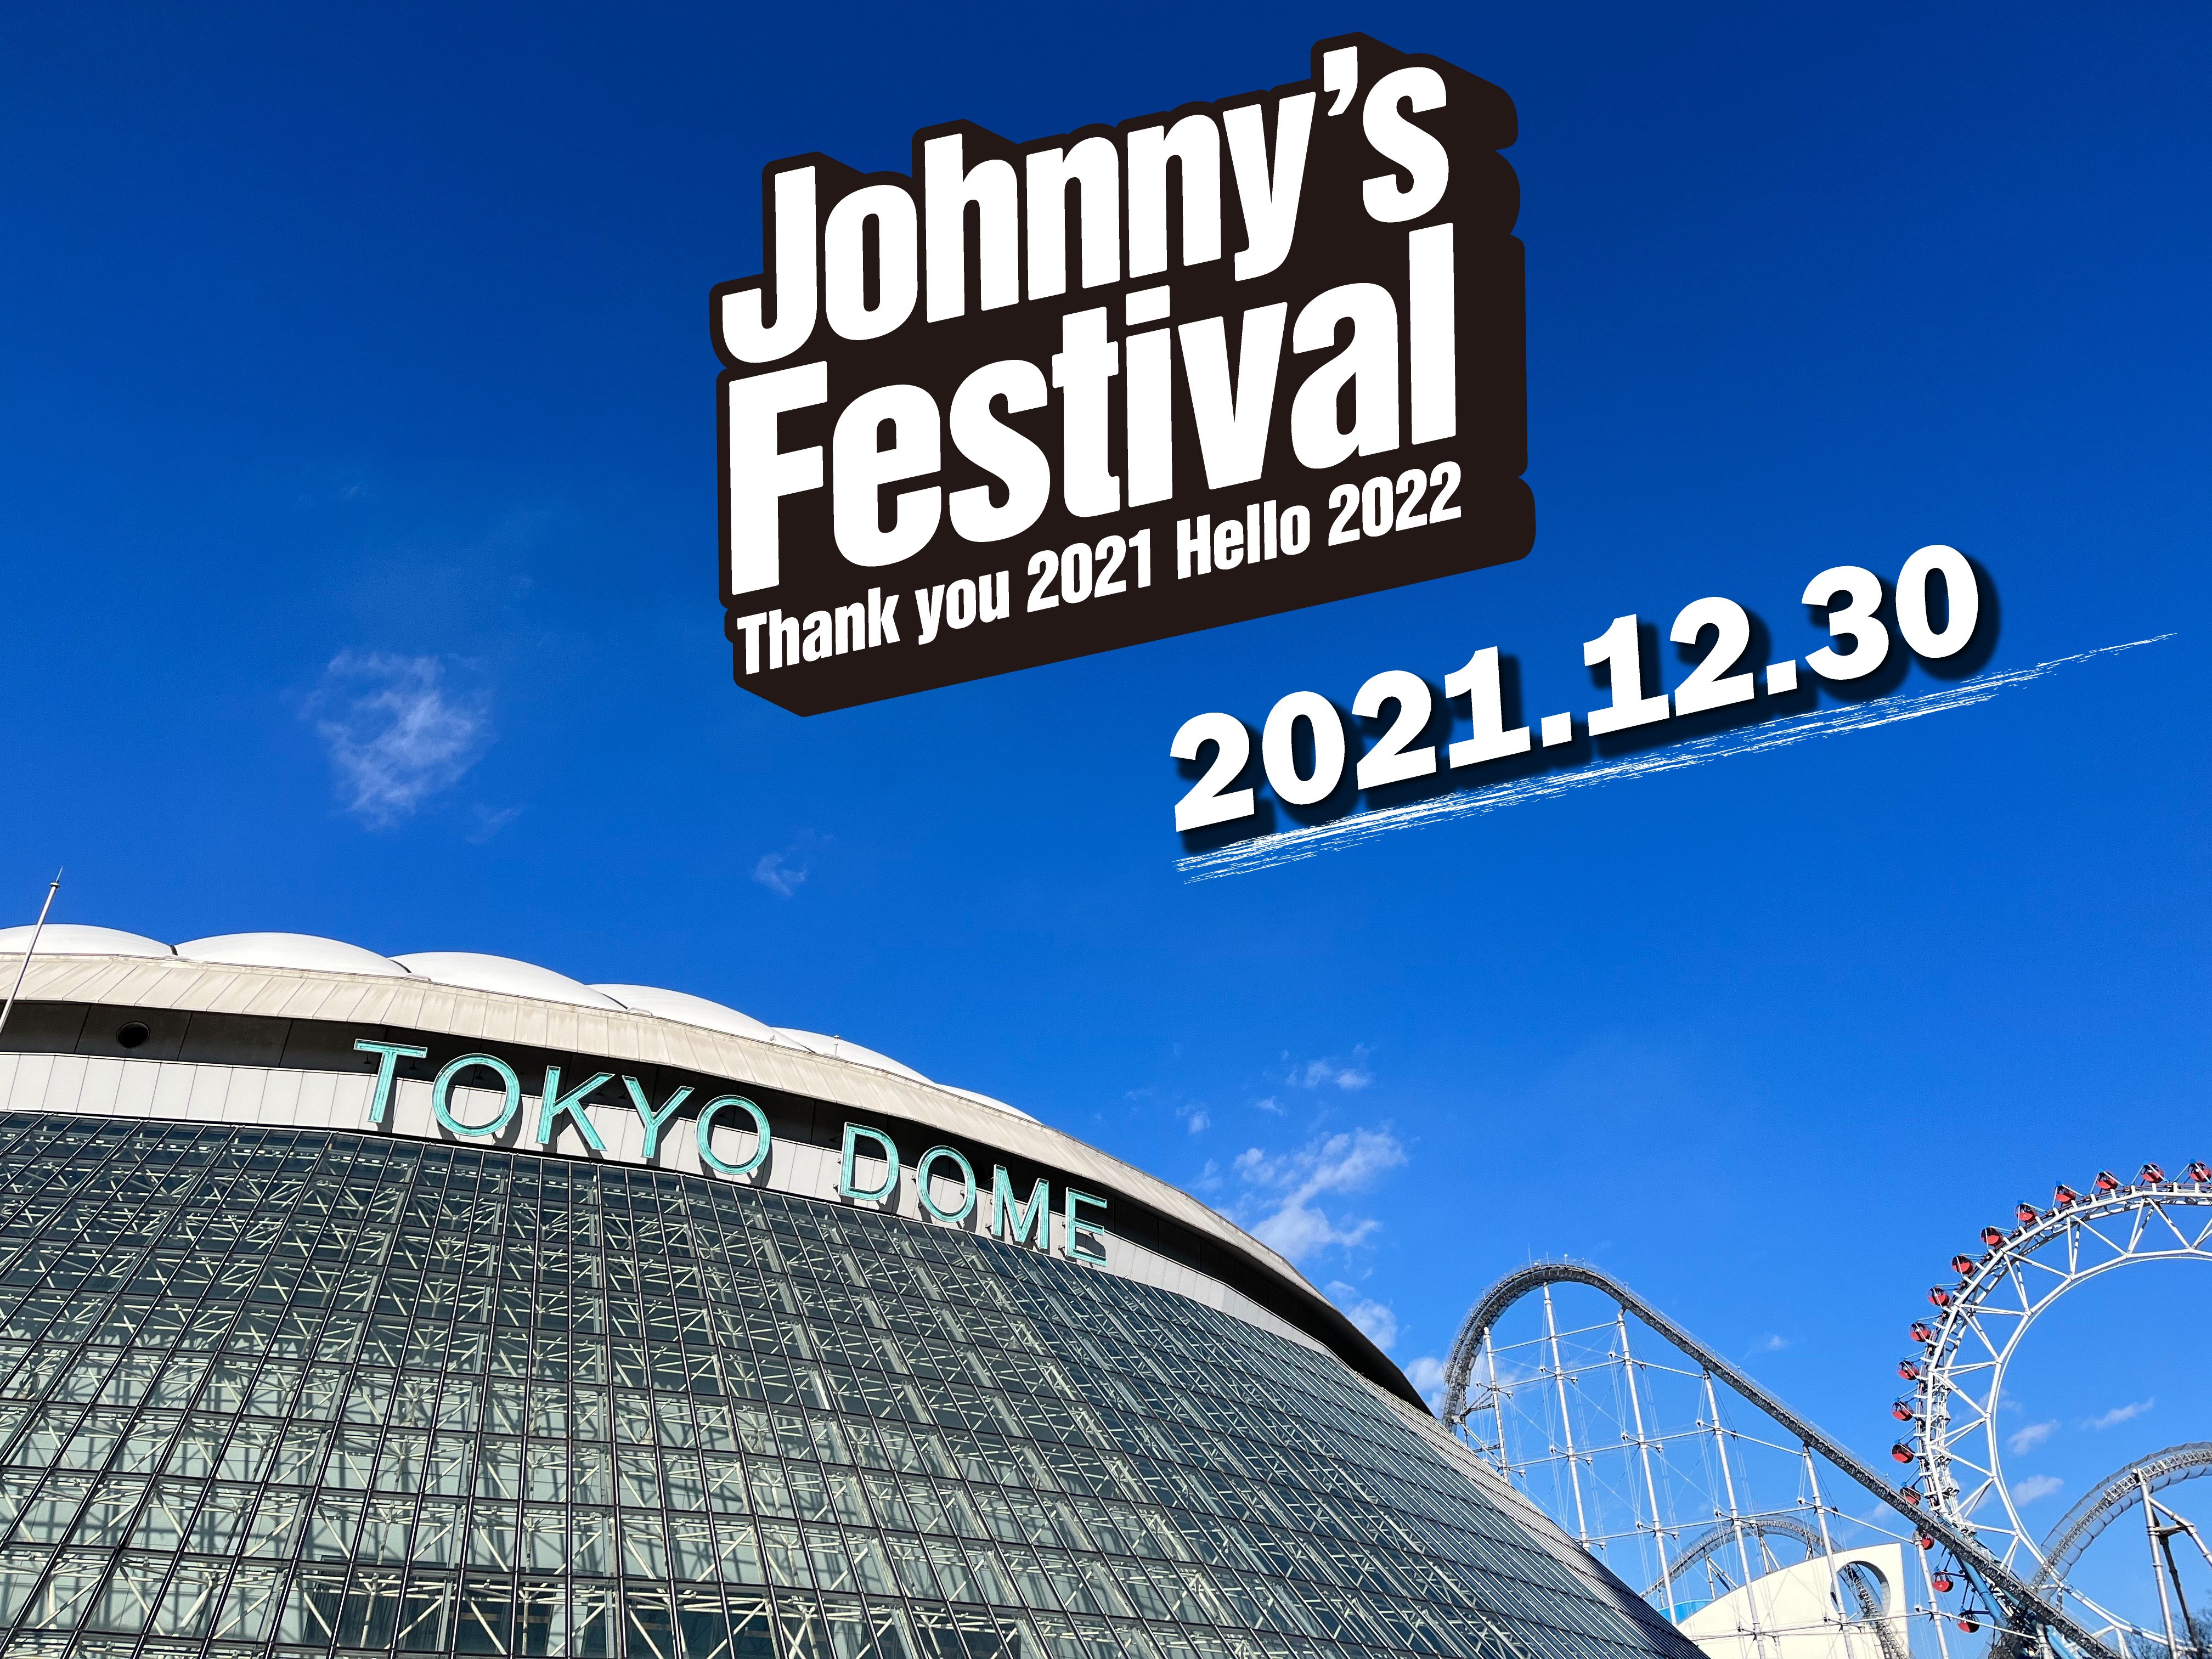 Johnny's Festival ～Thank you 2021 Hello 2022～ on Twitter